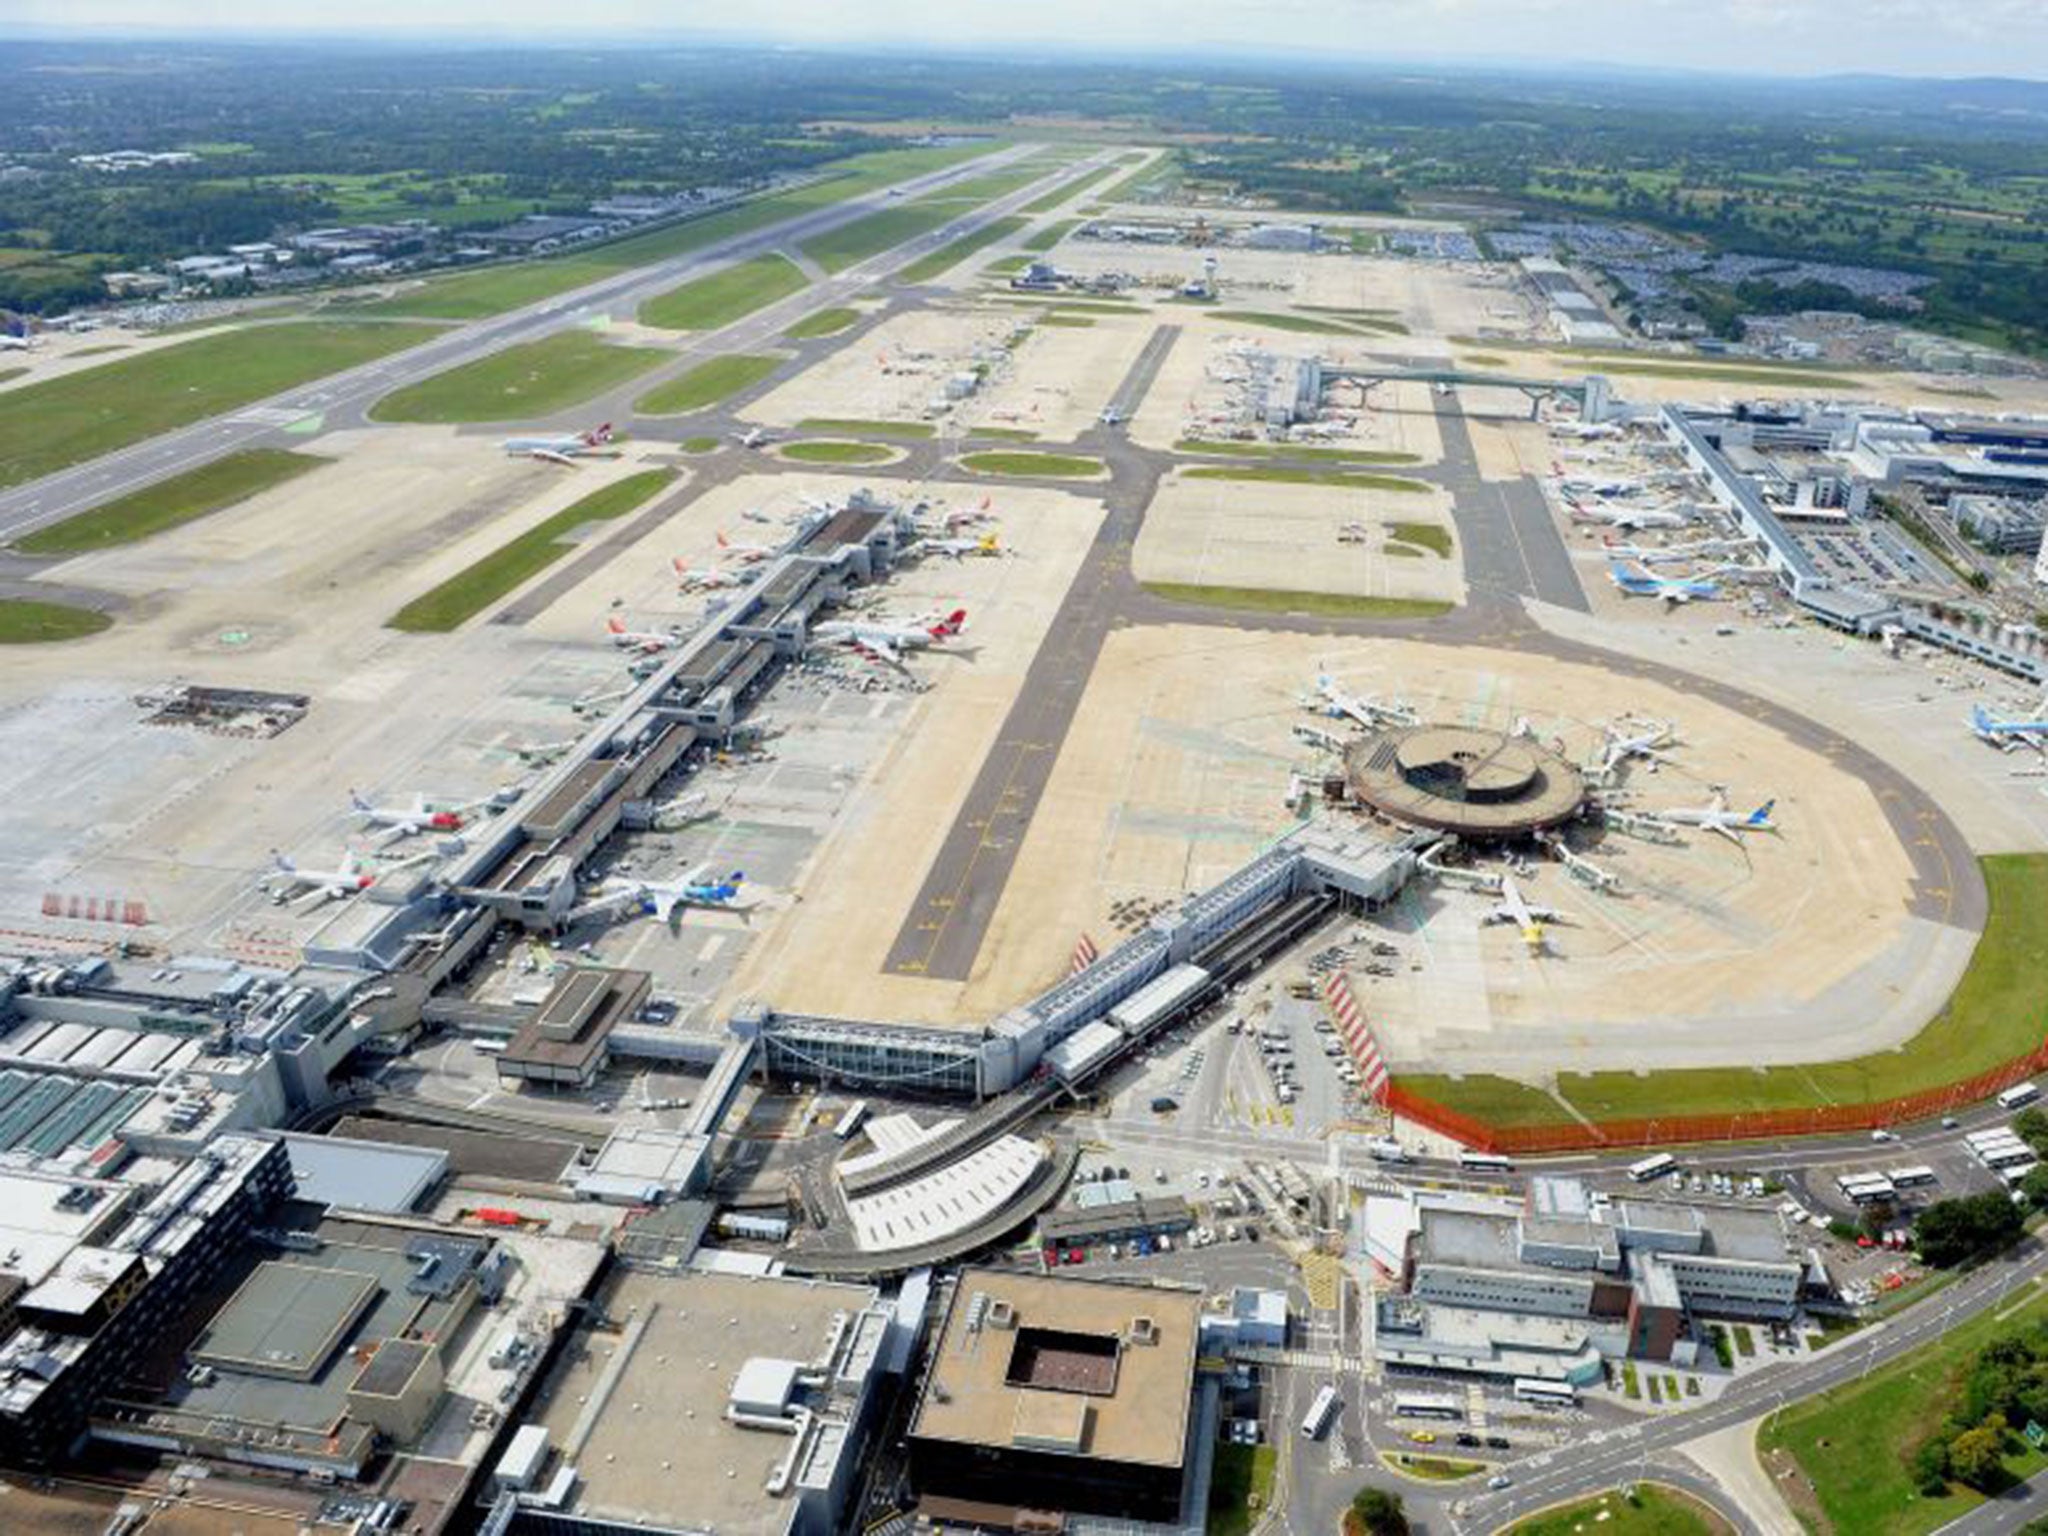 An aerial view of Gatwick Airport